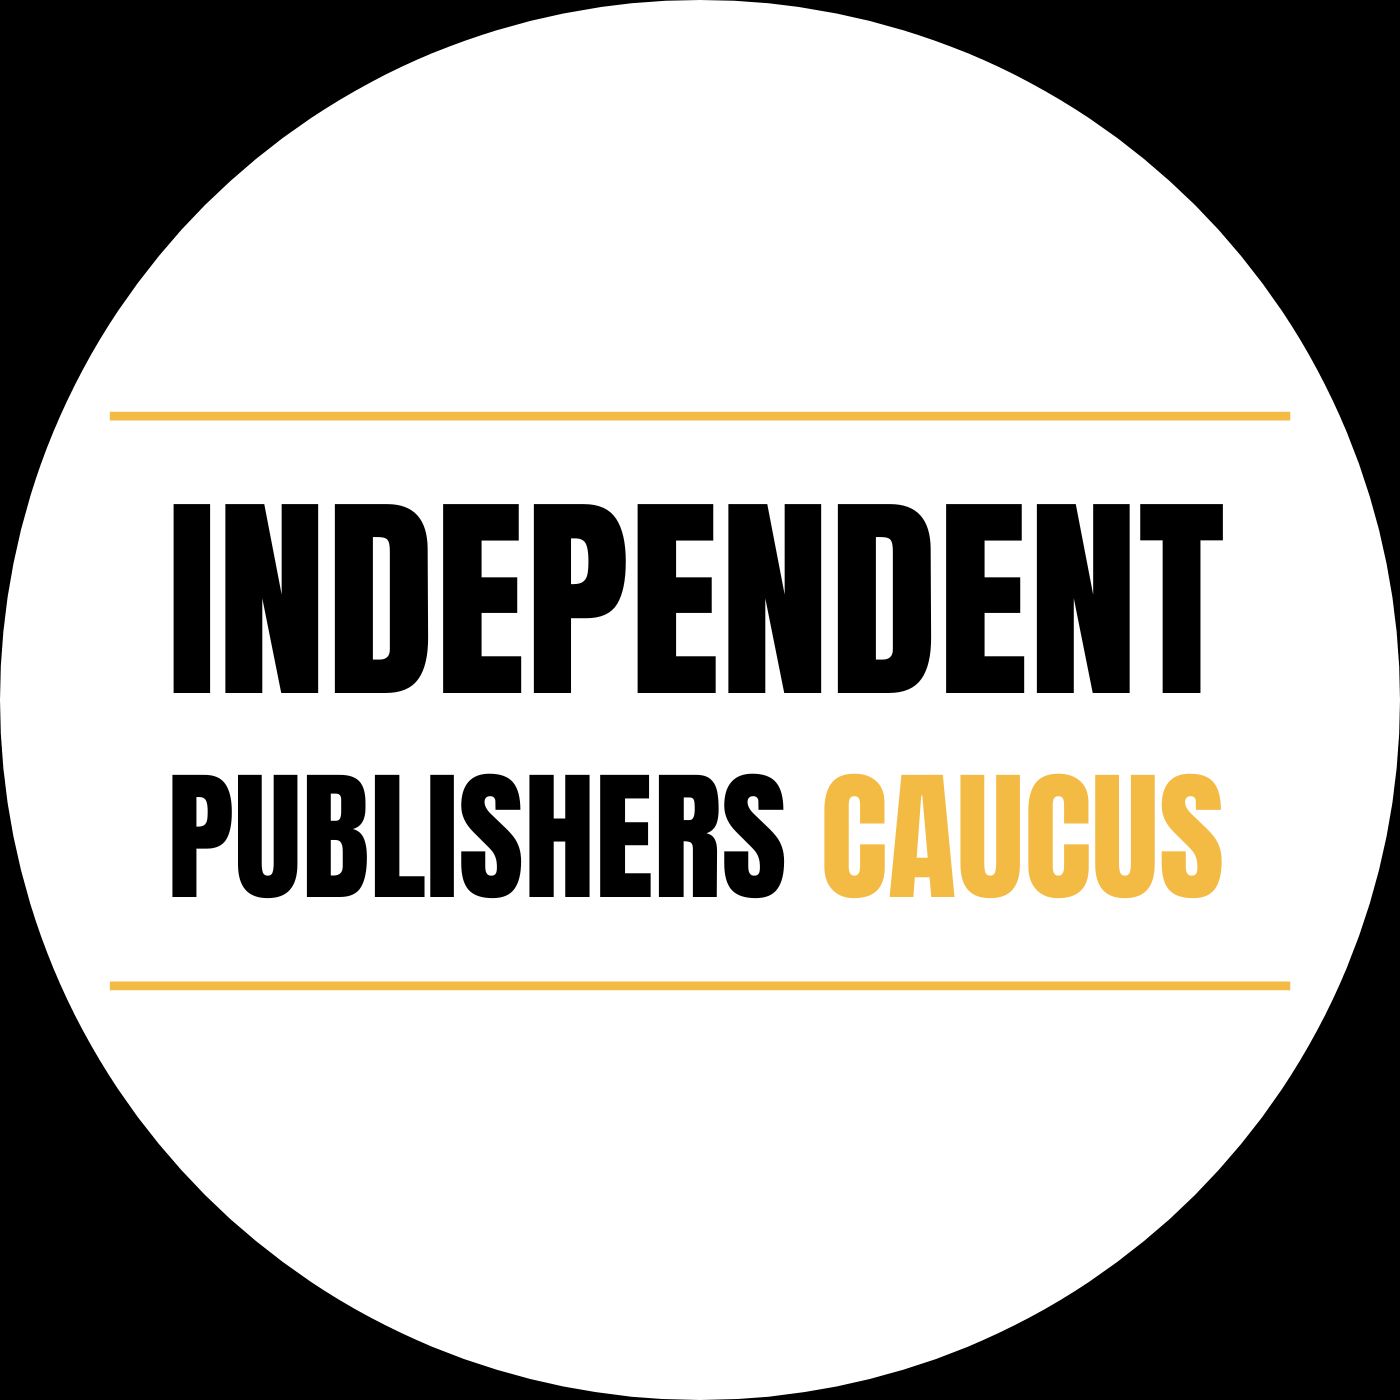 Independent Publishers Caucus Announces Inaugural Indie Press Month Display Contest Winner